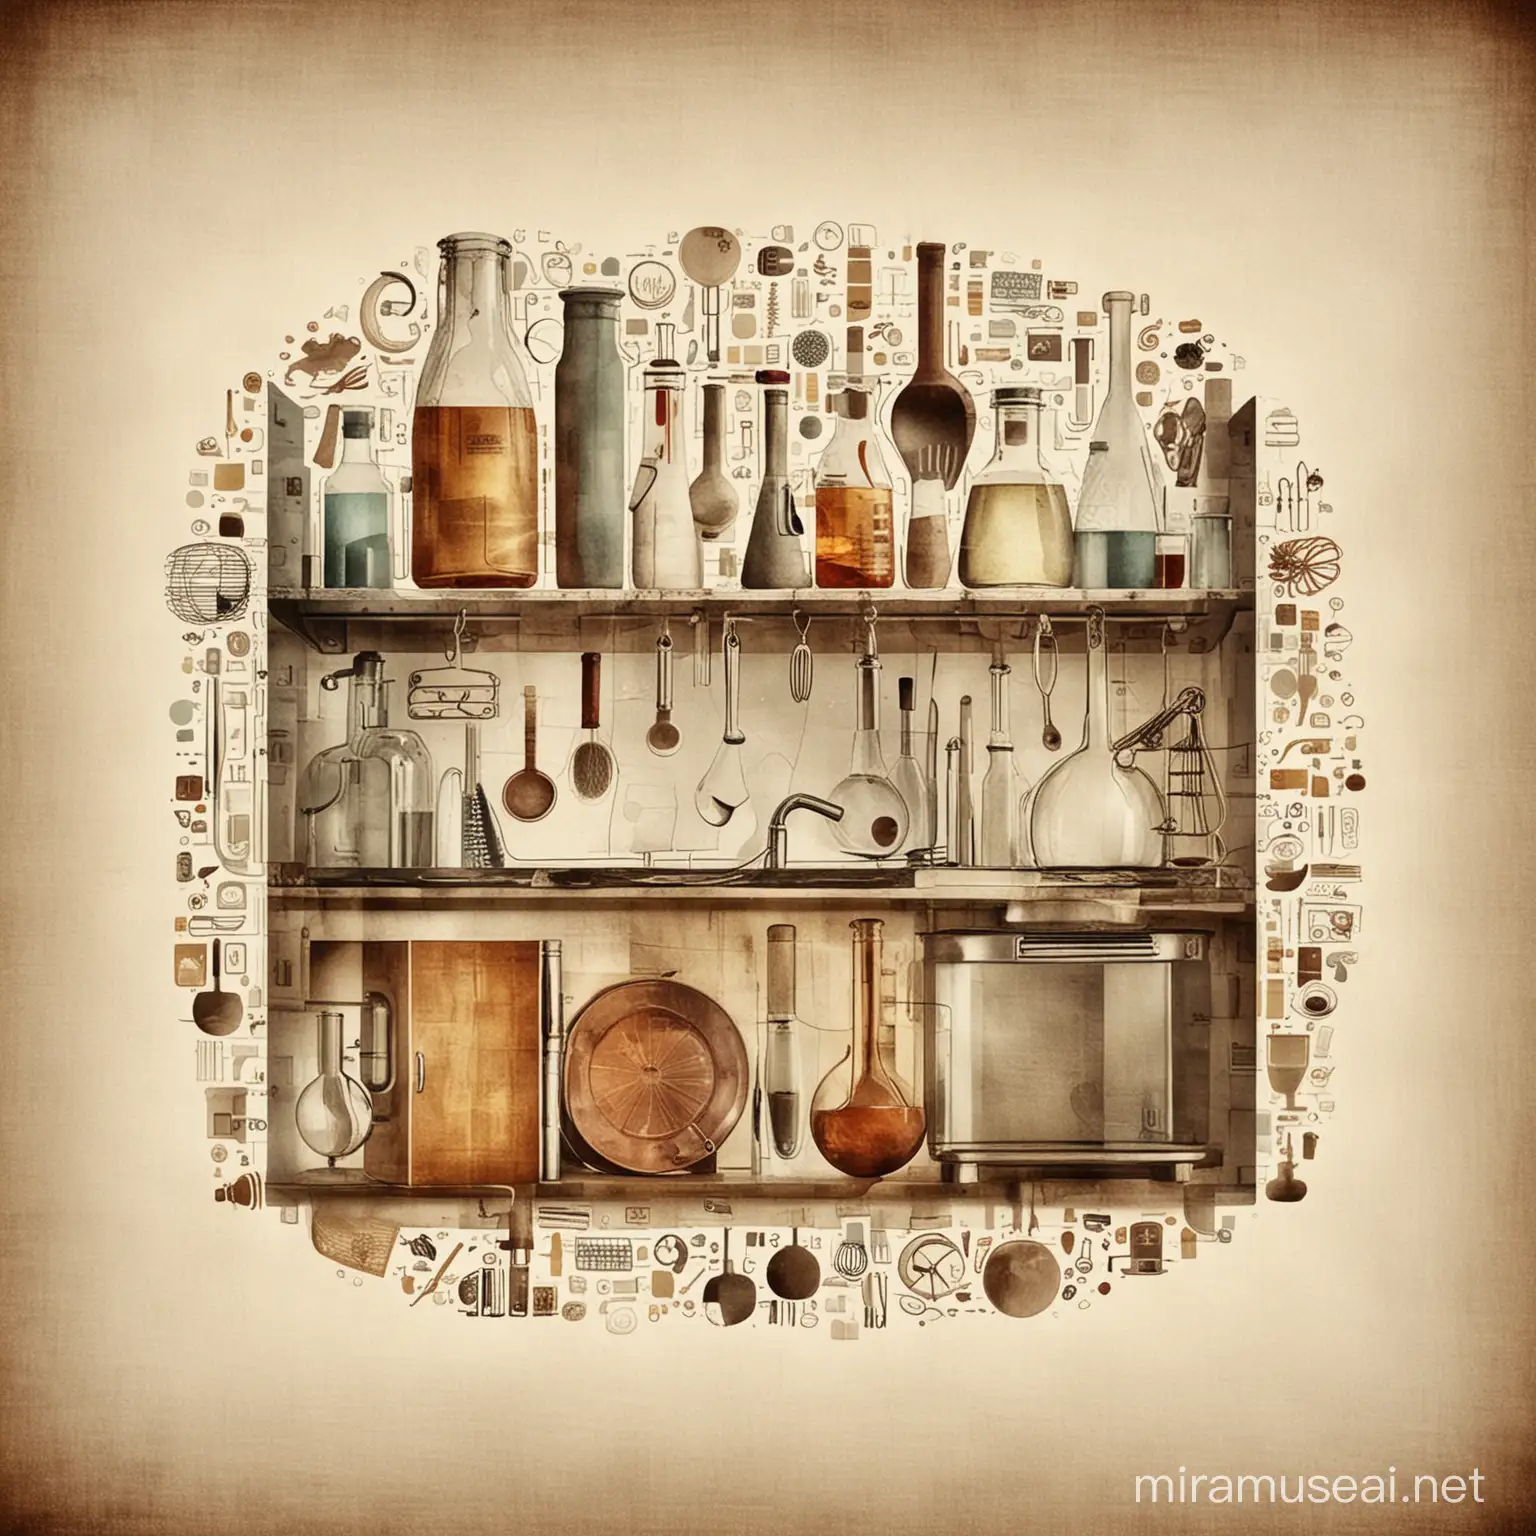 Experimental Fusion Abstract Imagery of Kitchen and Laboratory Convergence